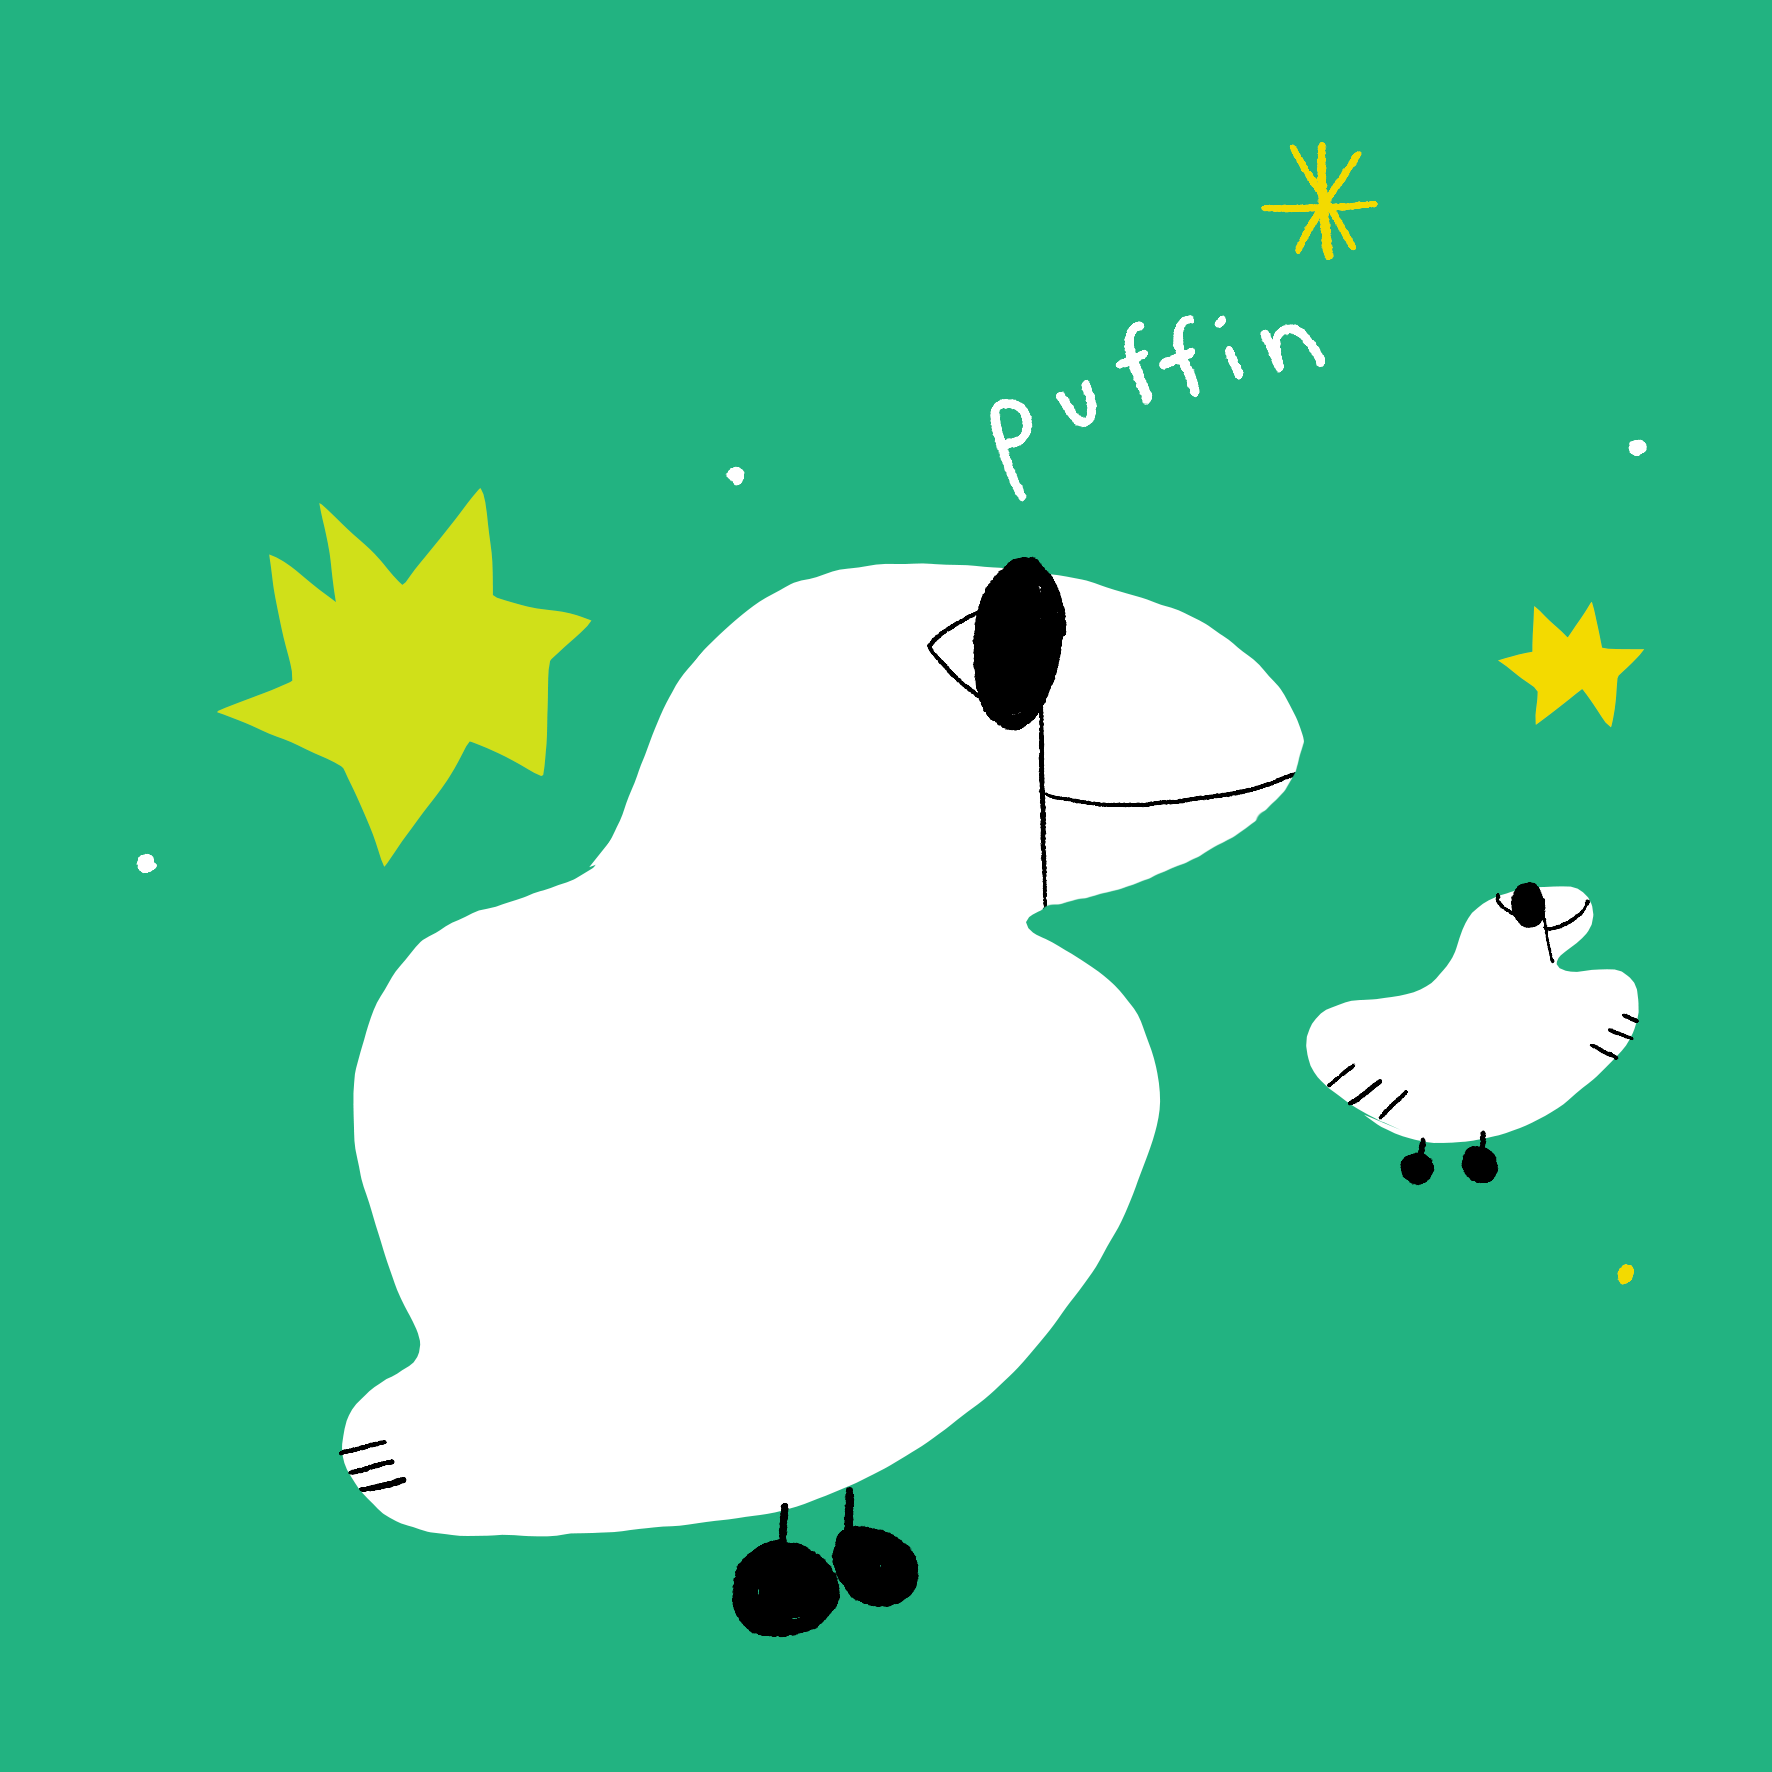 Puffin - Support Relearning Movement